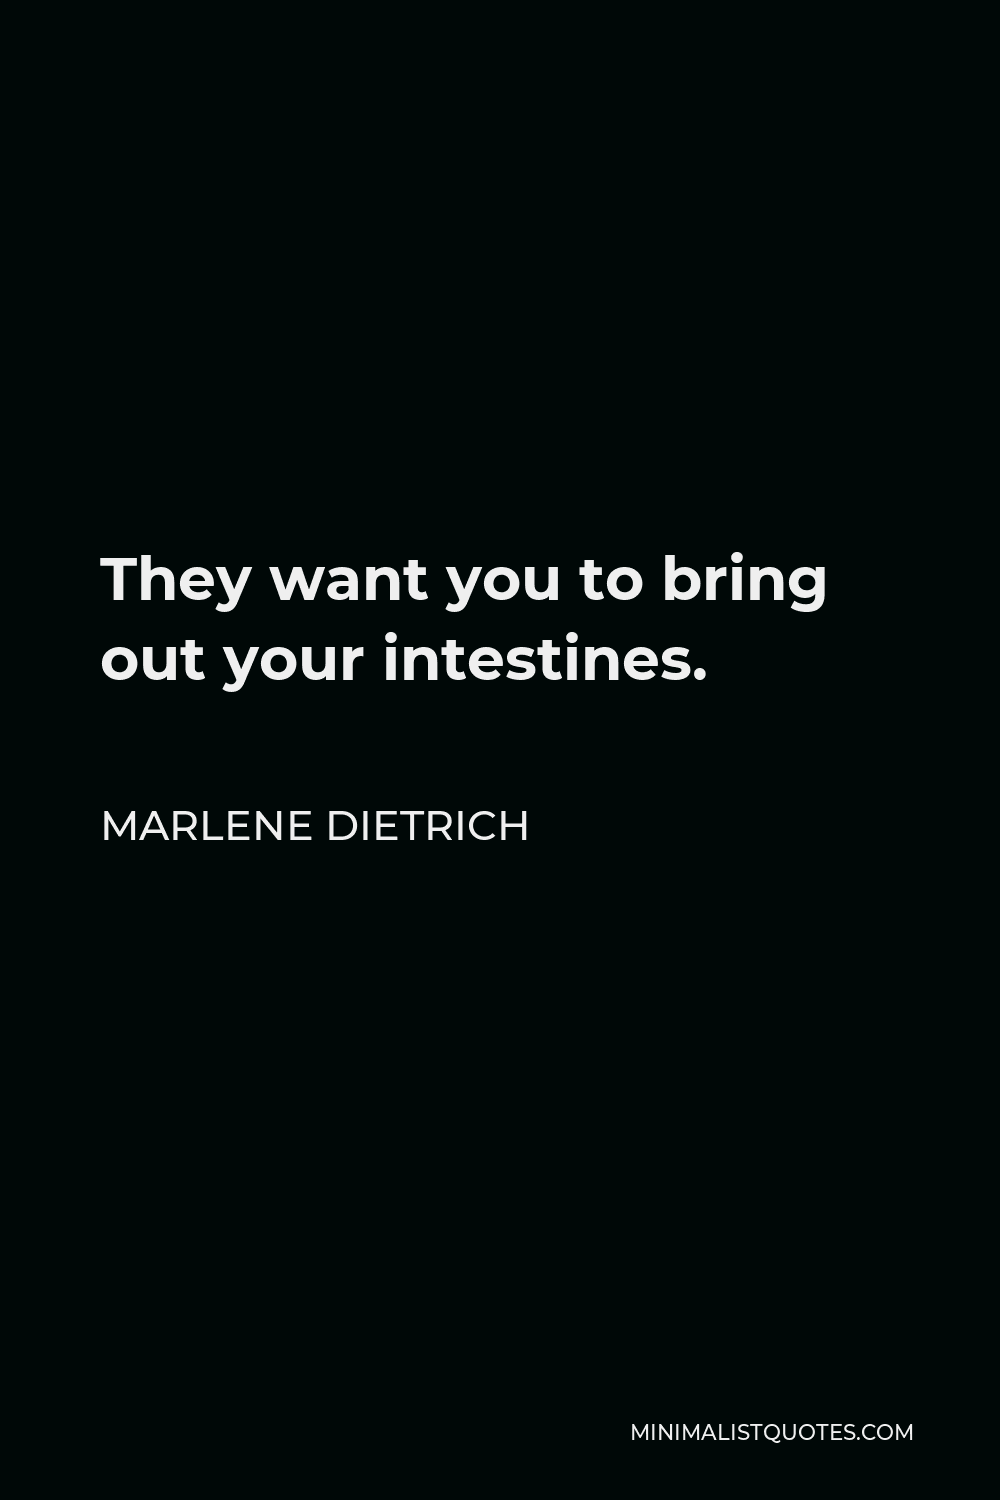 Marlene Dietrich Quote - They want you to bring out your intestines.